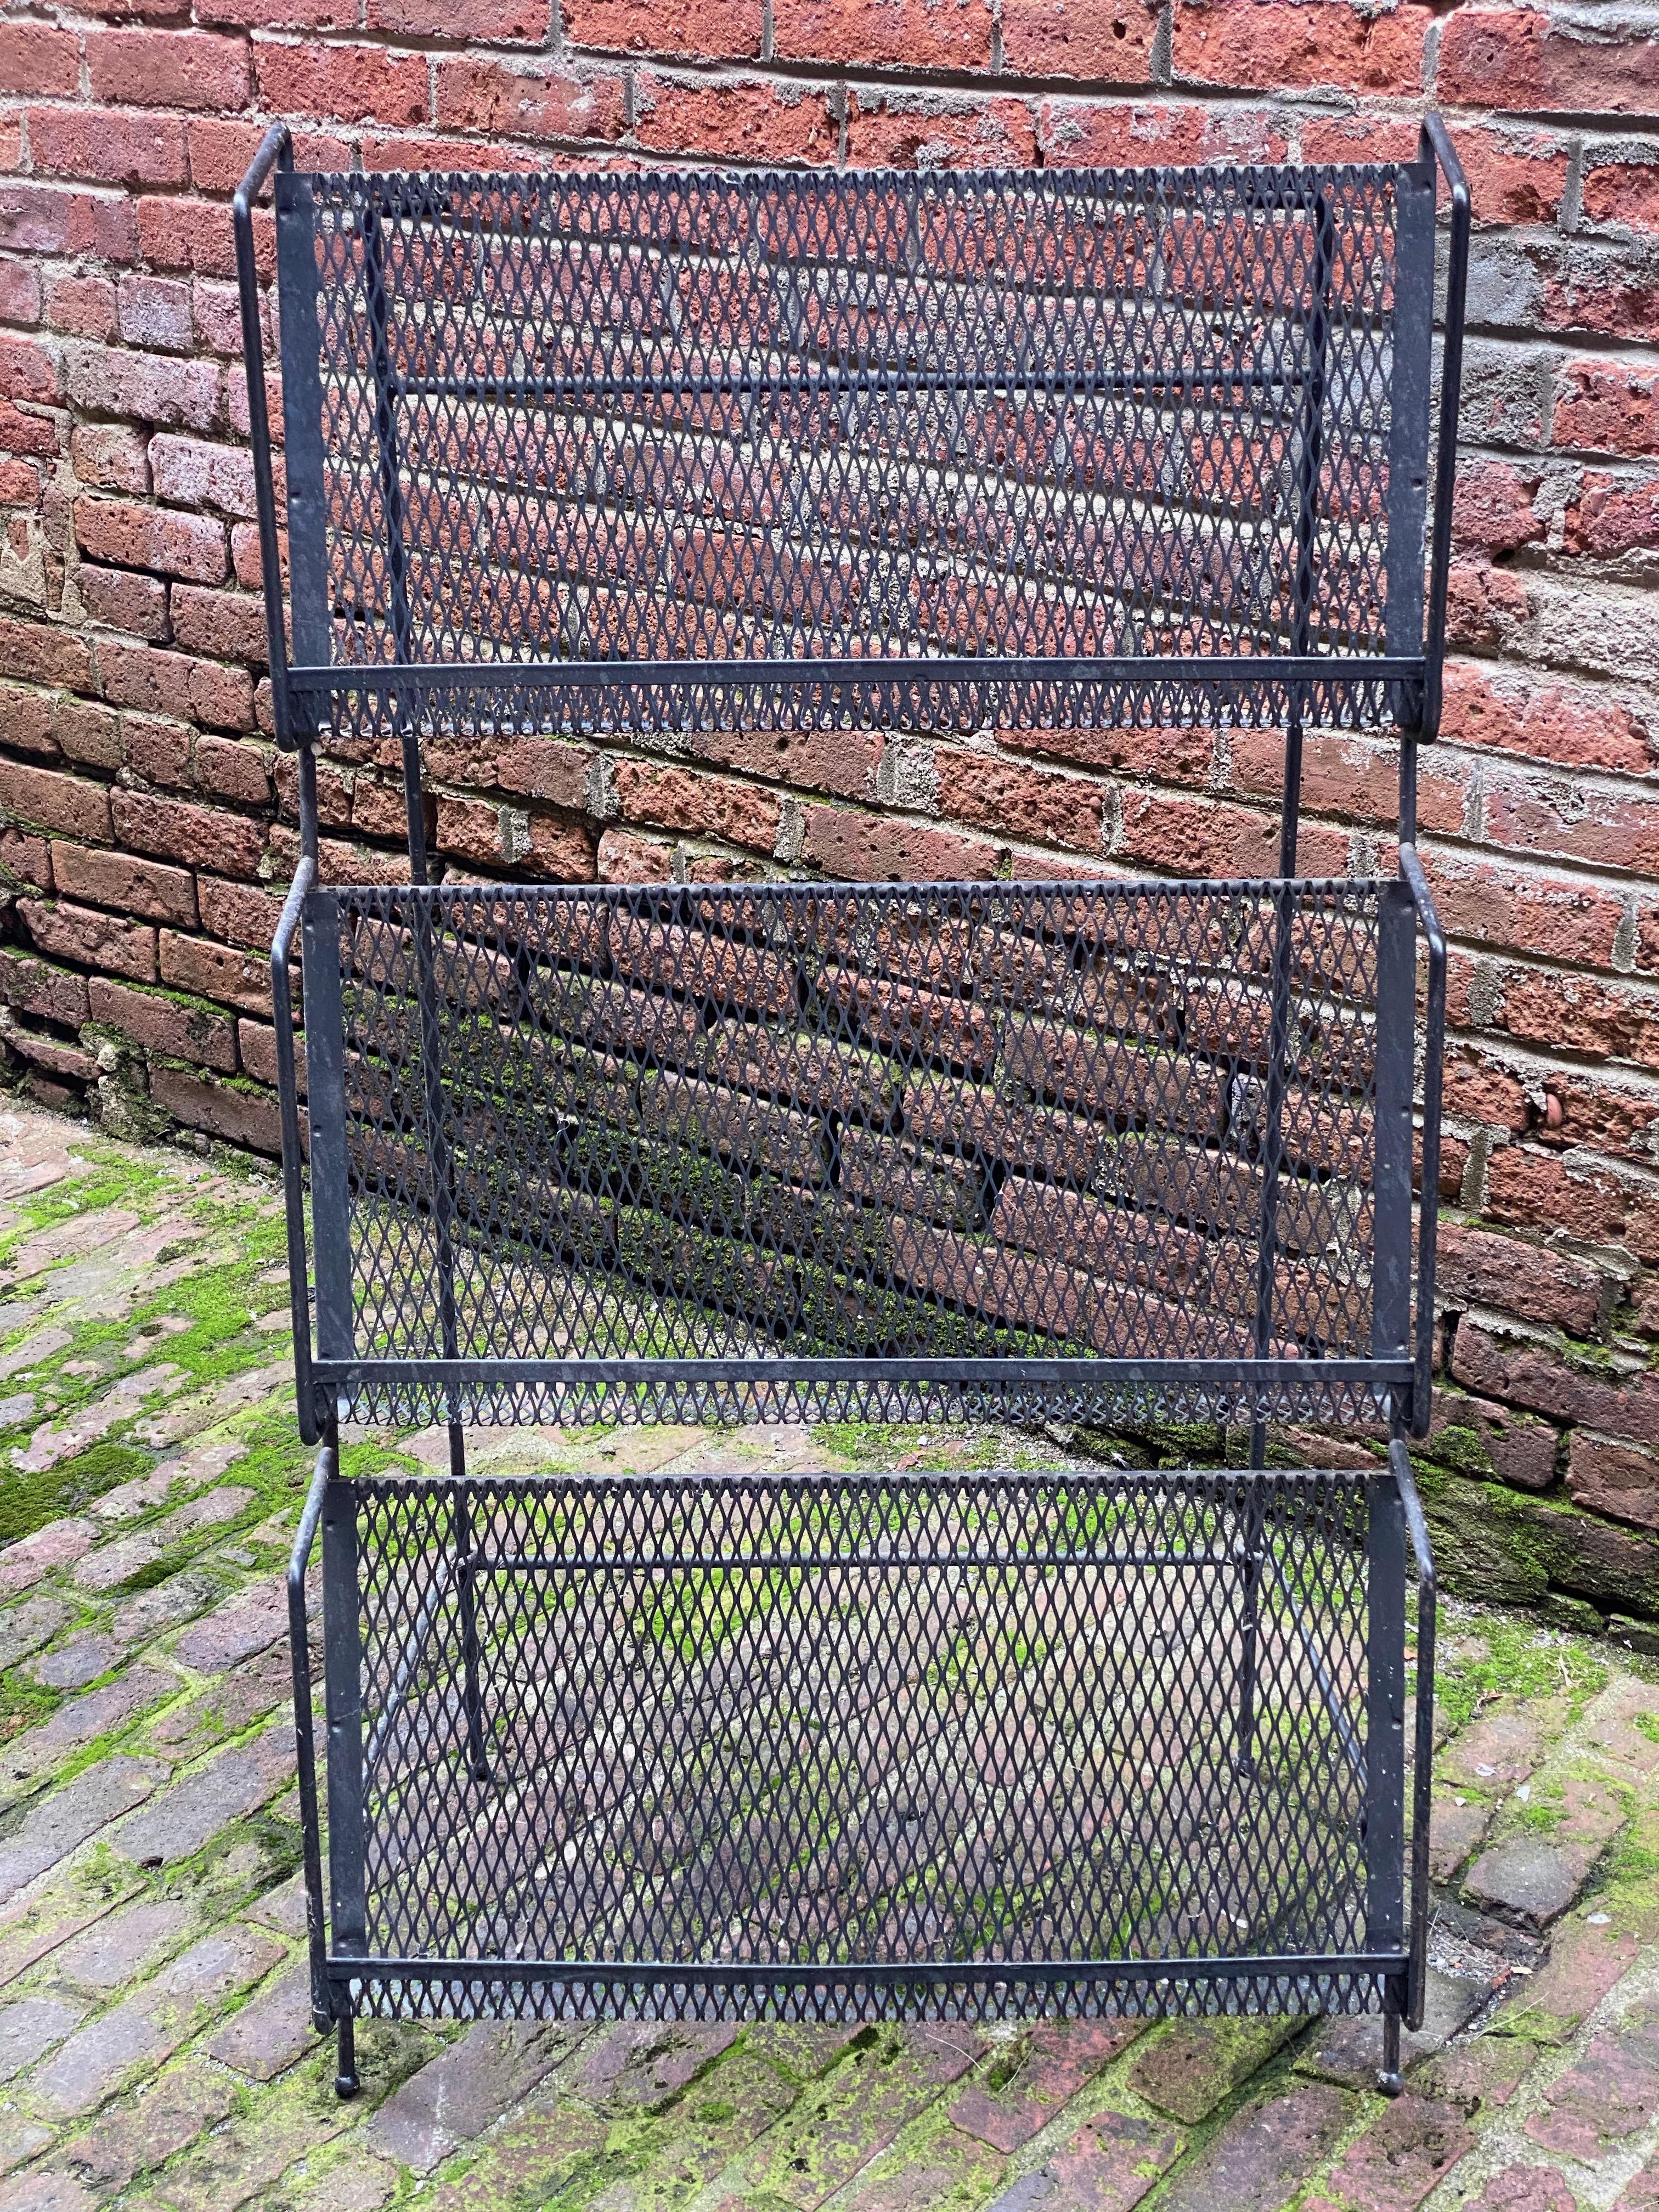 A great display item for your books, magazines or any media. Three iron and mesh shelves that can fold up flat for transport, circa 1950-1960. Shelf depth is 2.5